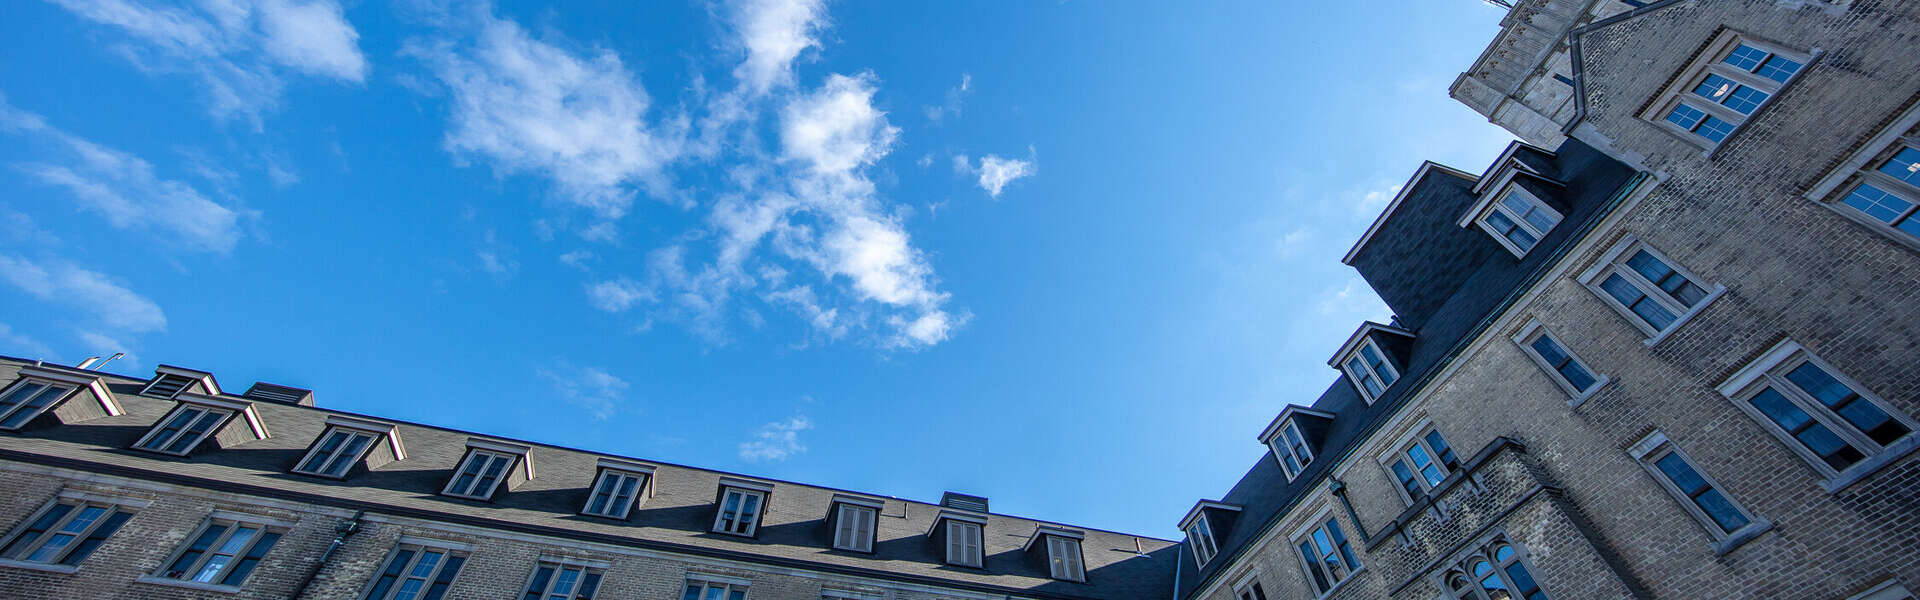 Johnston Hall from as seen from a low angle against a sunny, partly cloudy sky